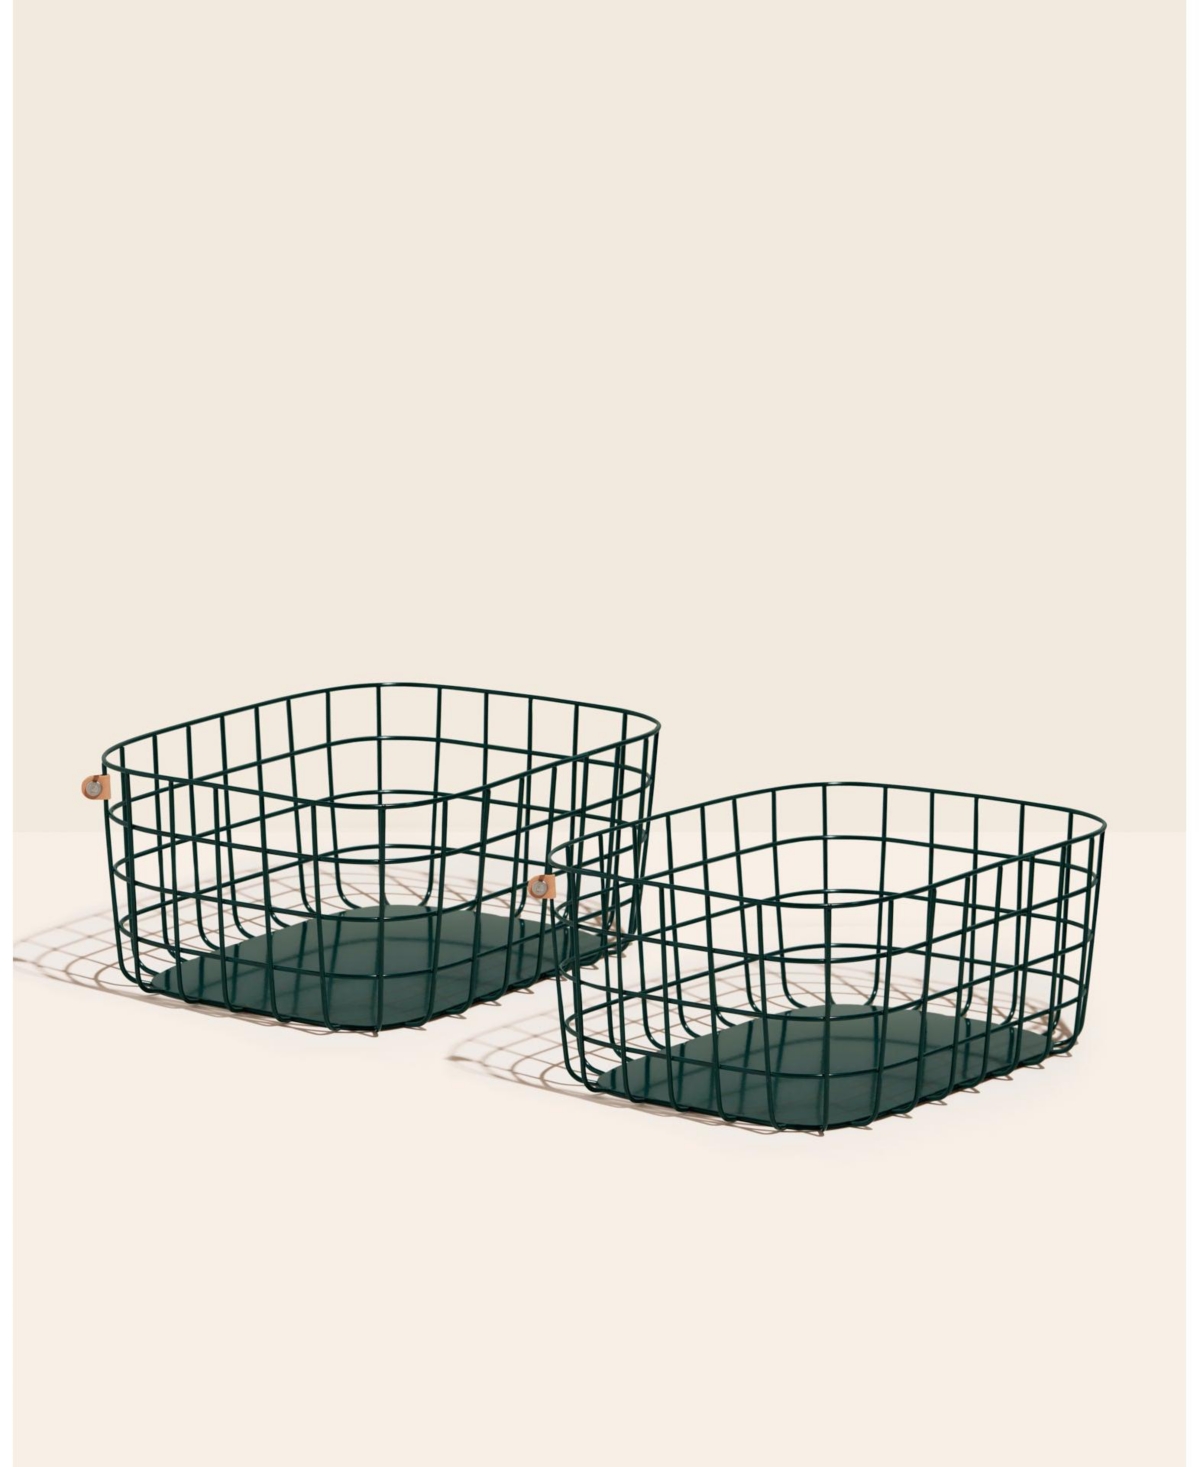 OPEN SPACES LARGE BASKETS